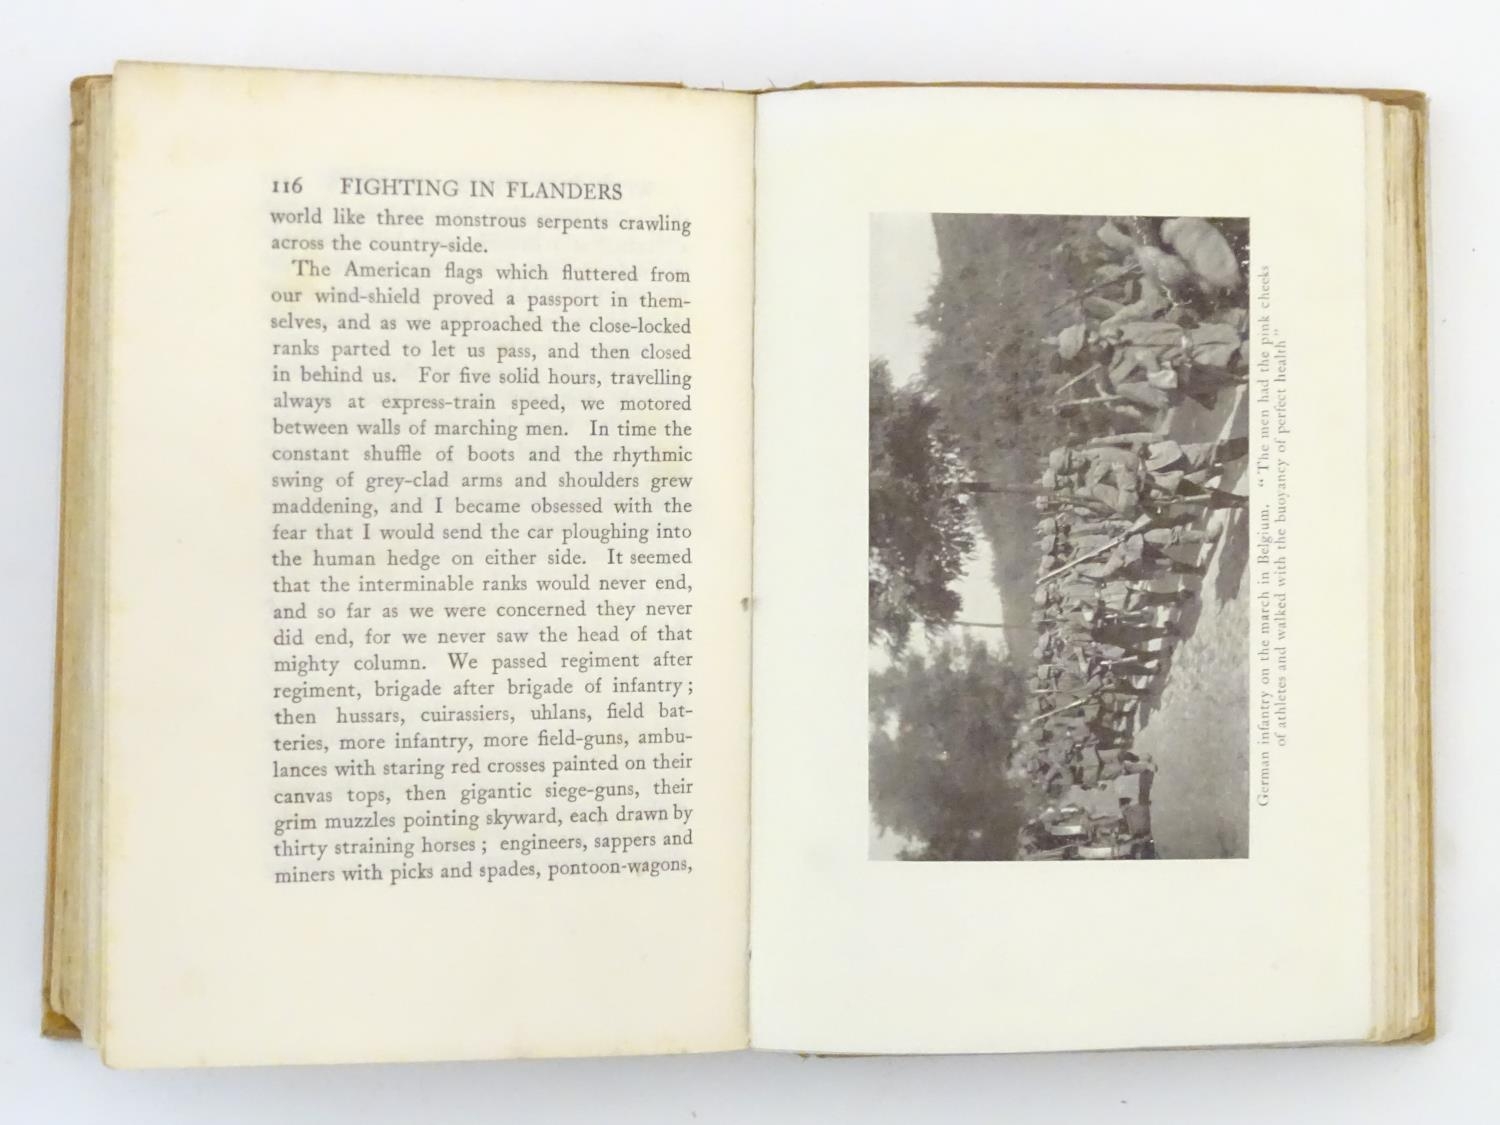 Book: Fighting in Flanders by E. Alexander Powell with illustrations from photographs by Donald - Image 2 of 6